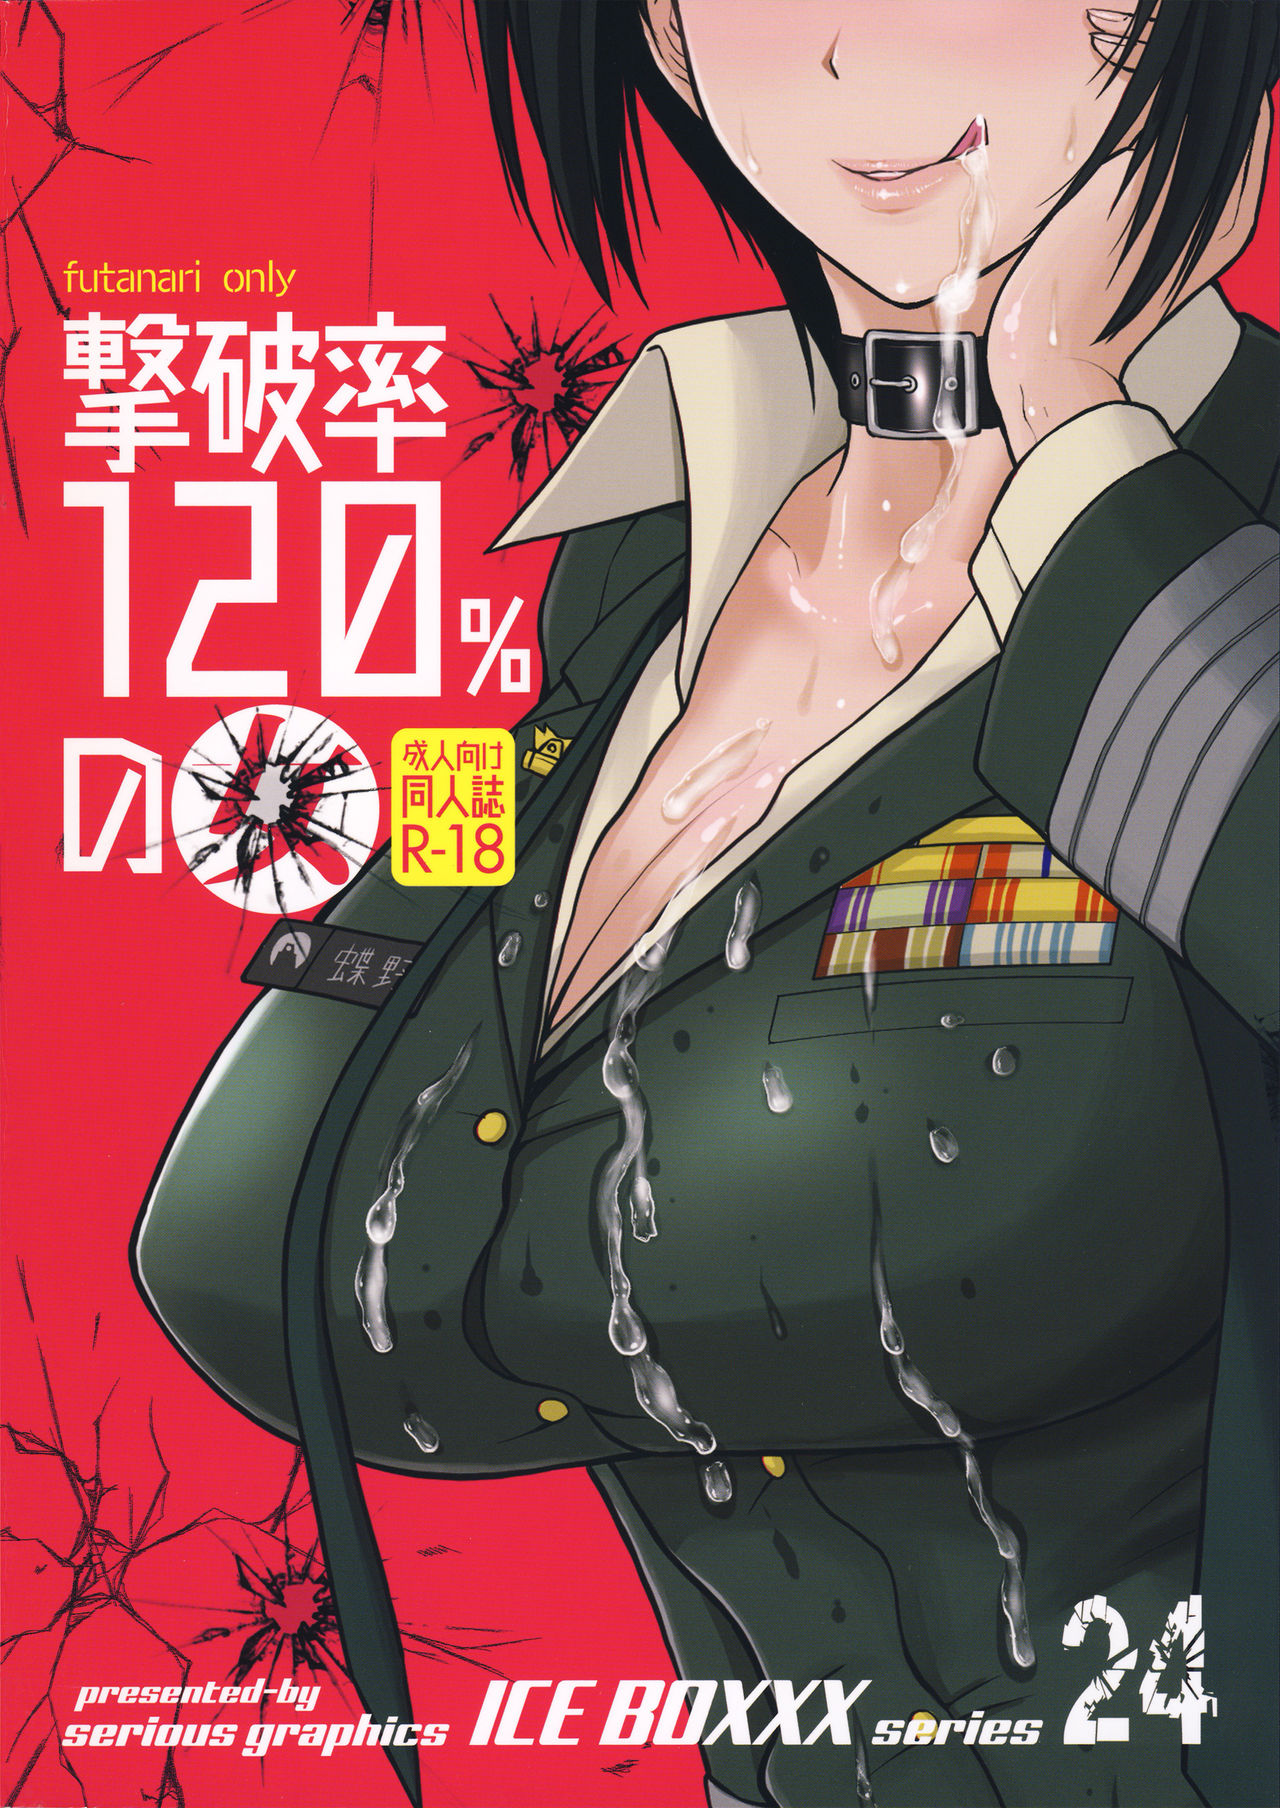 (CT33) [SERIOUS GRAPHICS (ICE)] ICE BOXXX 24 (Girls und Panzer) [English] [Anomalous Raven] page 30 full